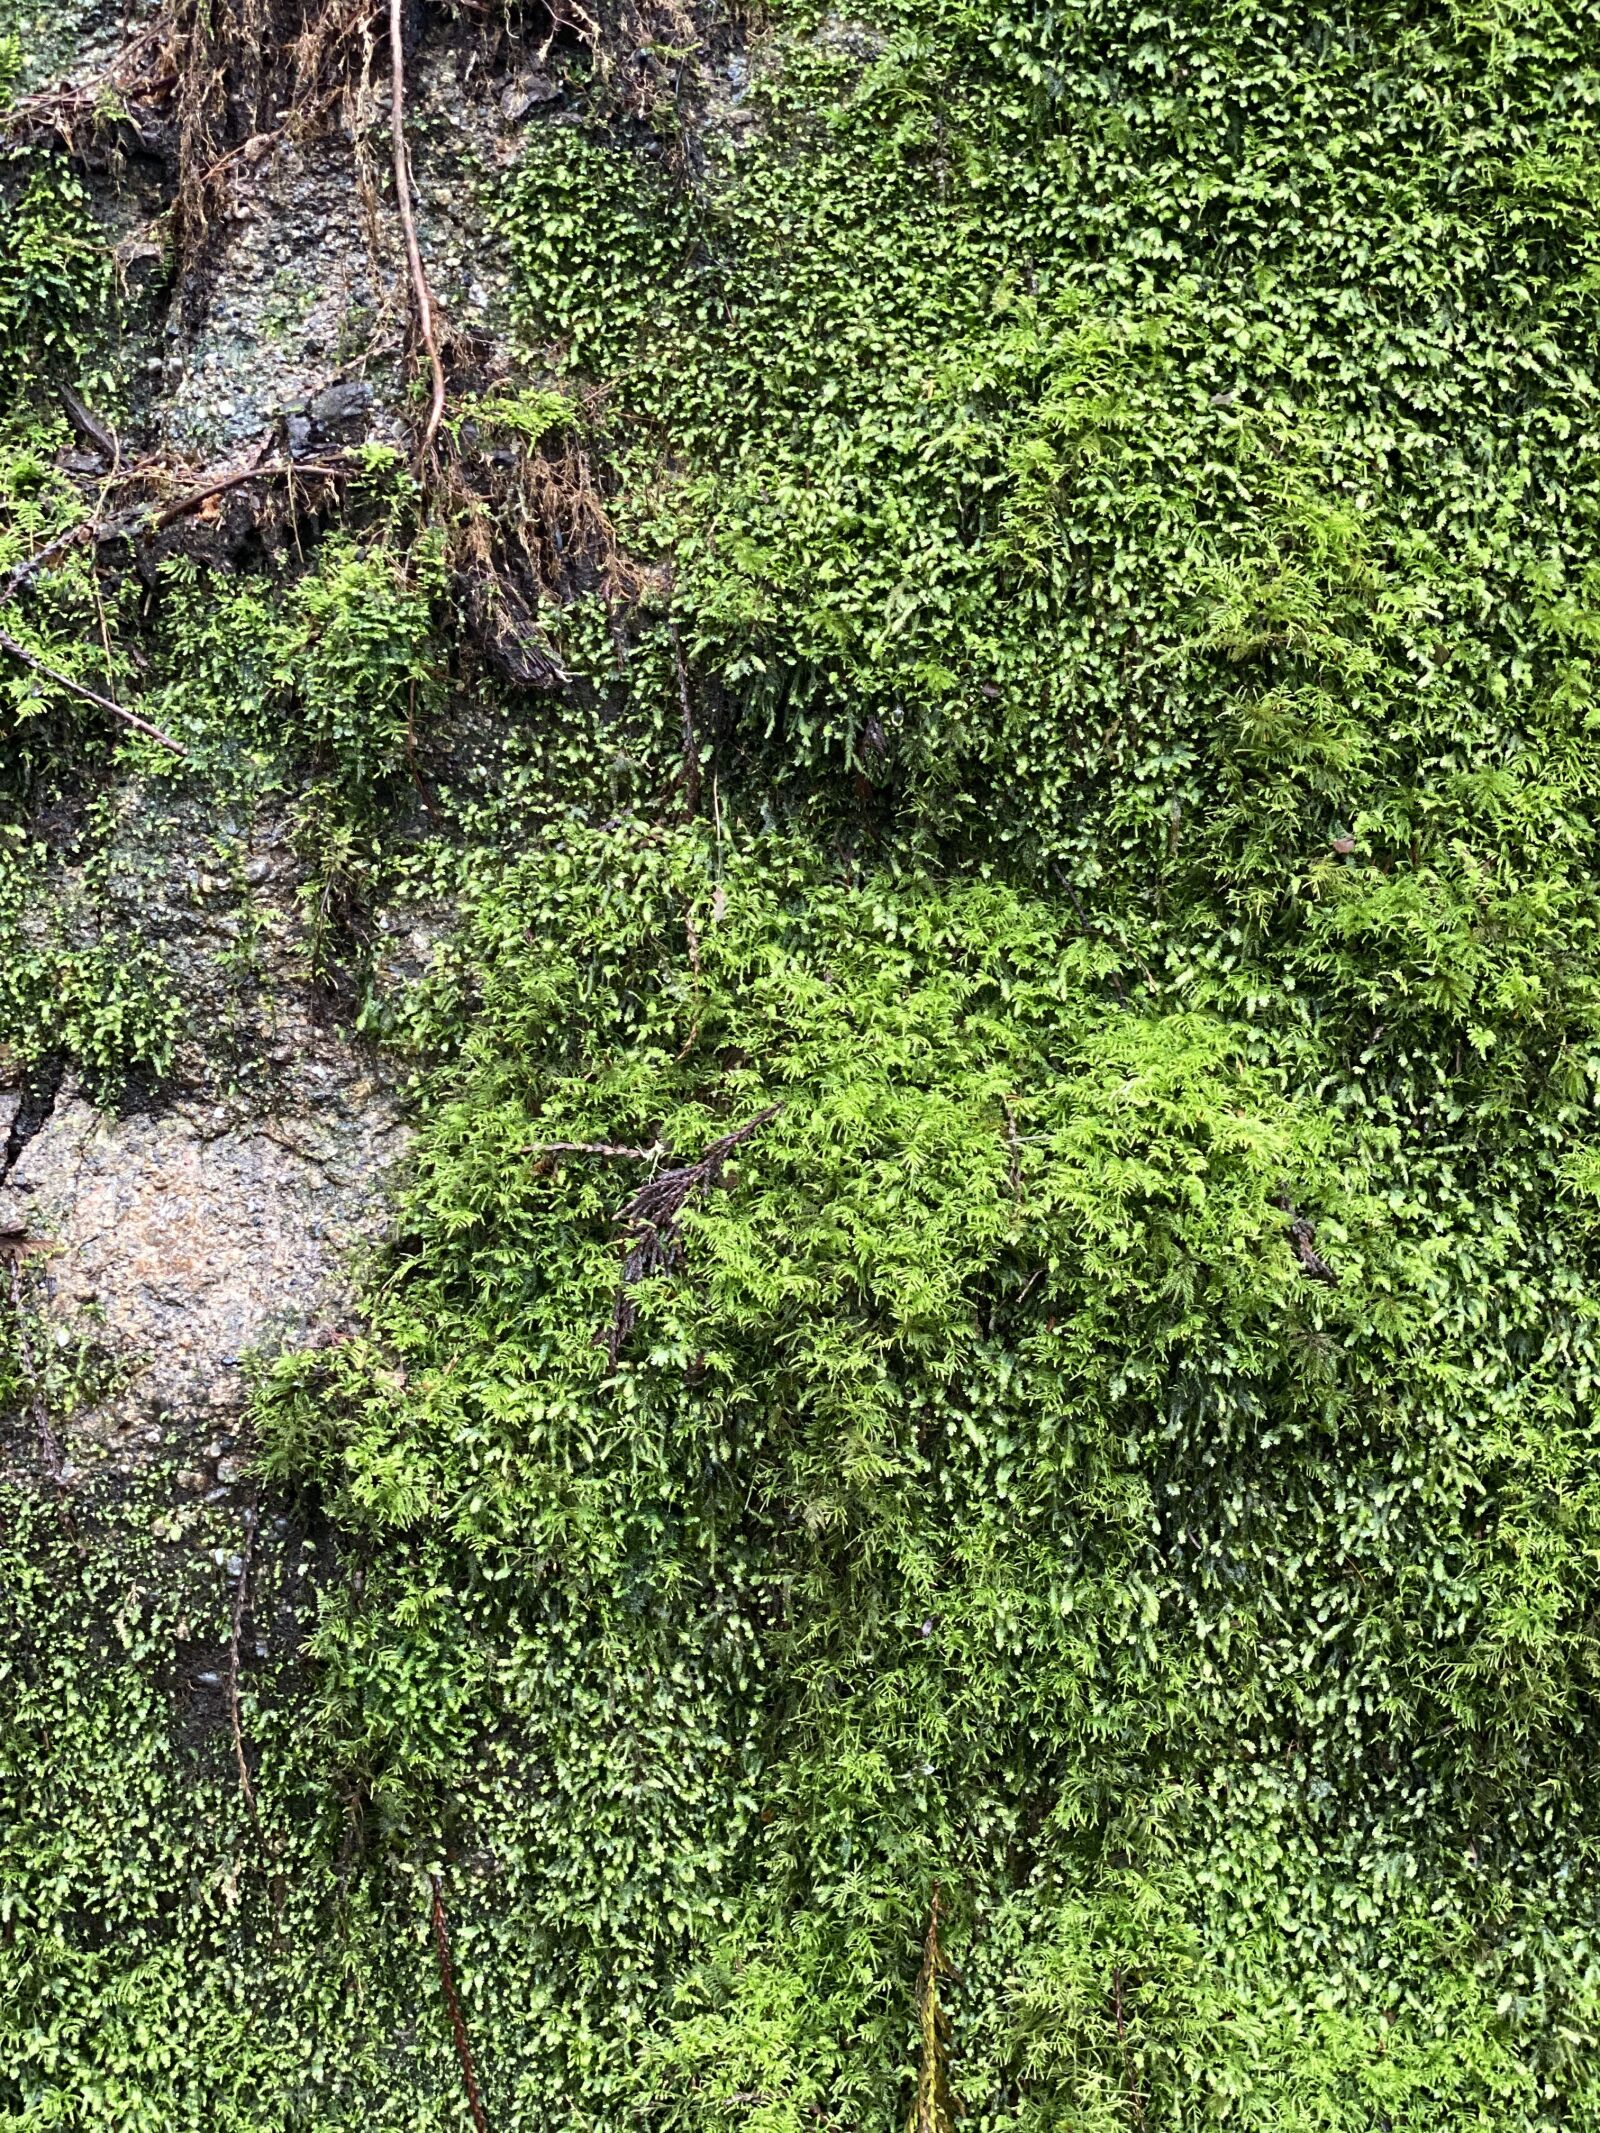 Apple iPhone 11 Pro Max + iPhone 11 Pro Max back dual camera 6mm f/2 sample photo. Moss, green, forest photography